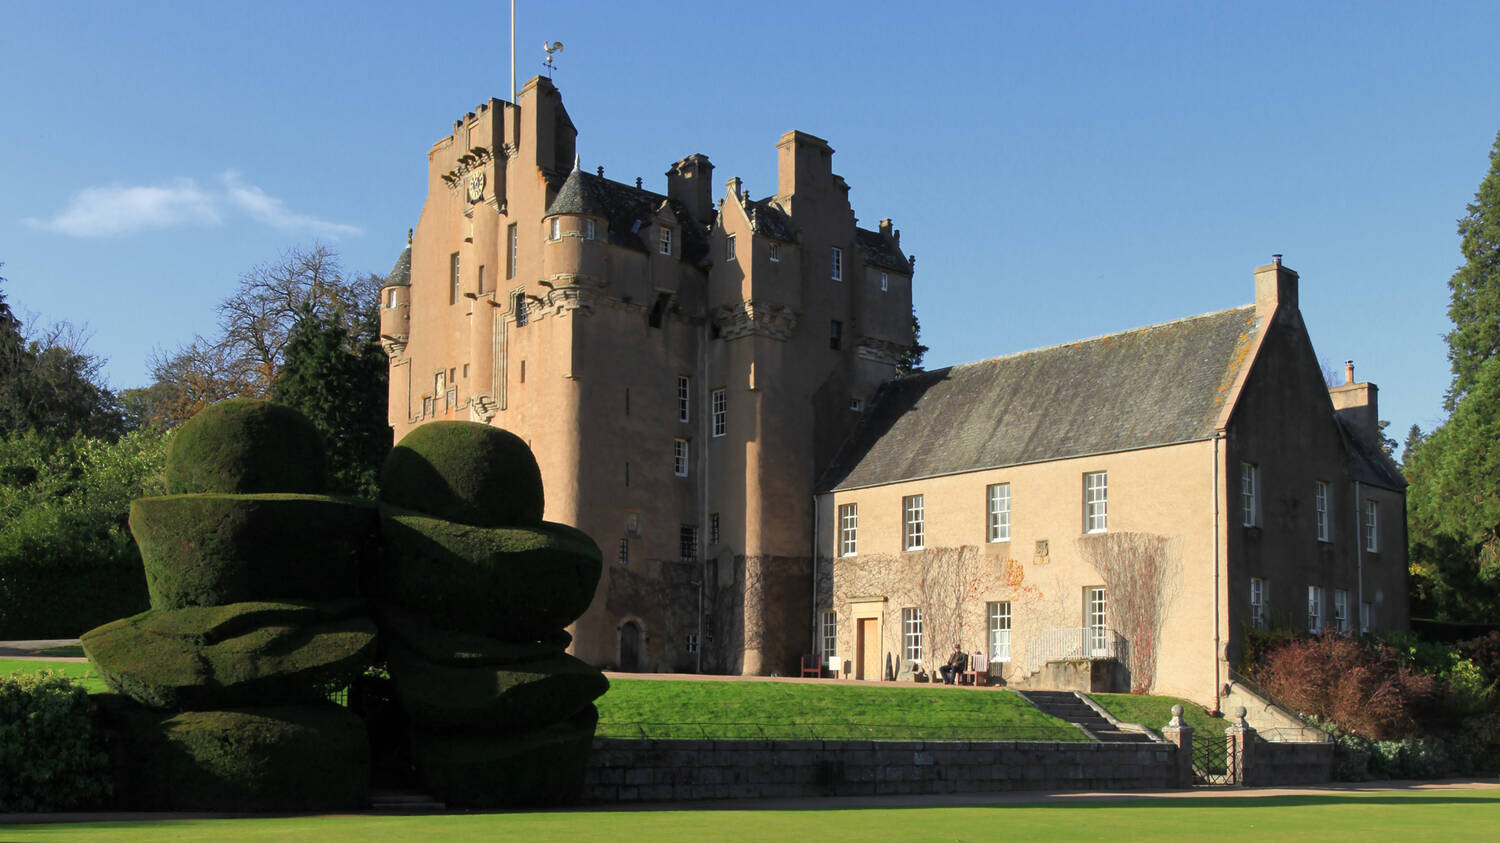 A view of Crathes Castle from the manicured lawn in front. Two large eggcup-shaped yew hedges stand in the foreground.